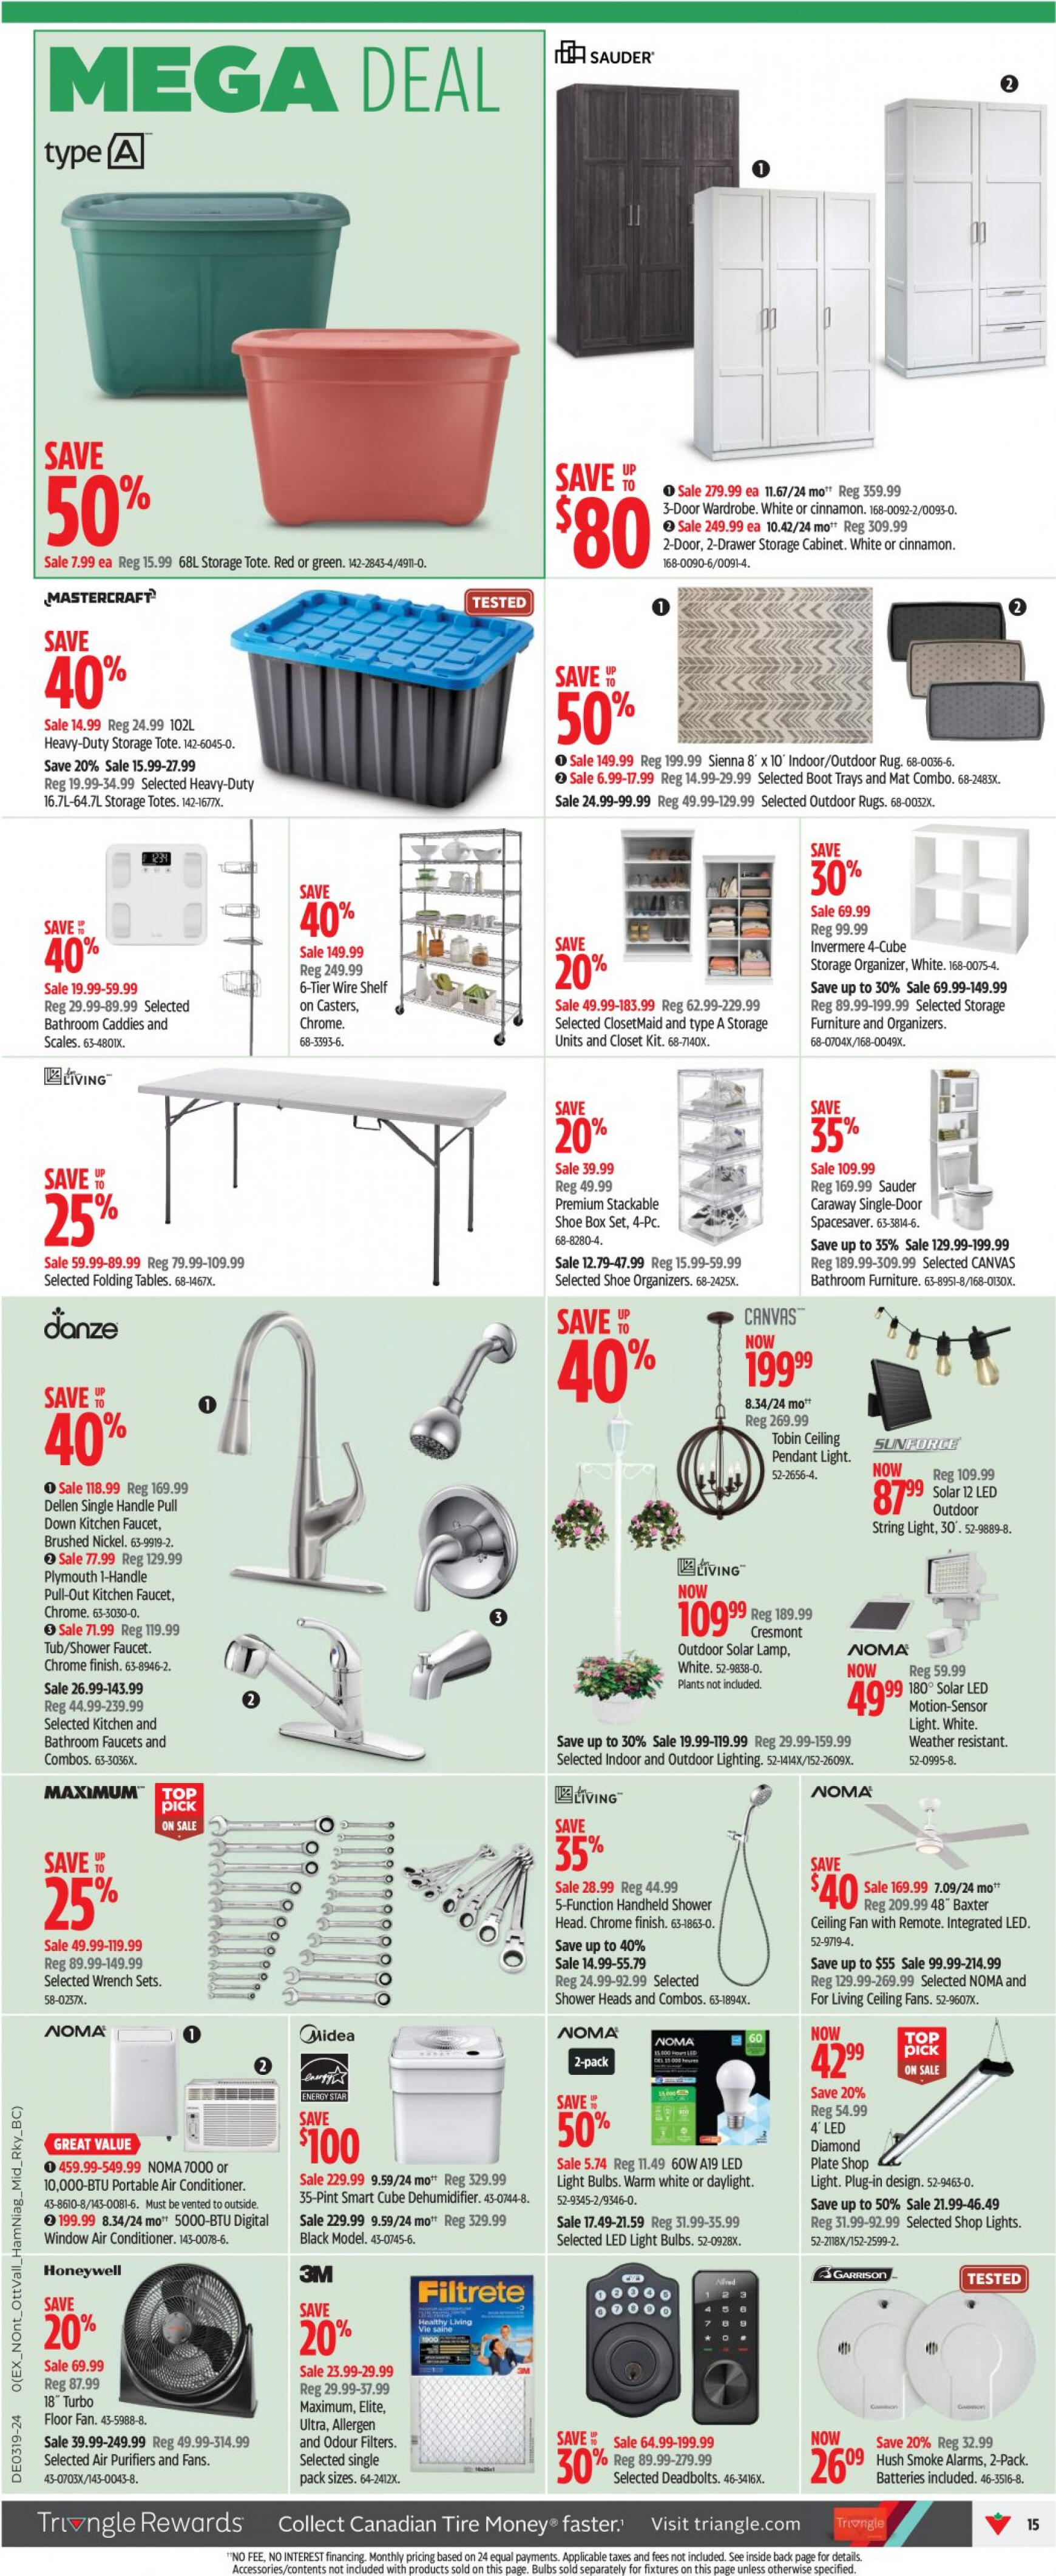 canadian-tire - Canadian Tire flyer current 02.05. - 08.05. - page: 14